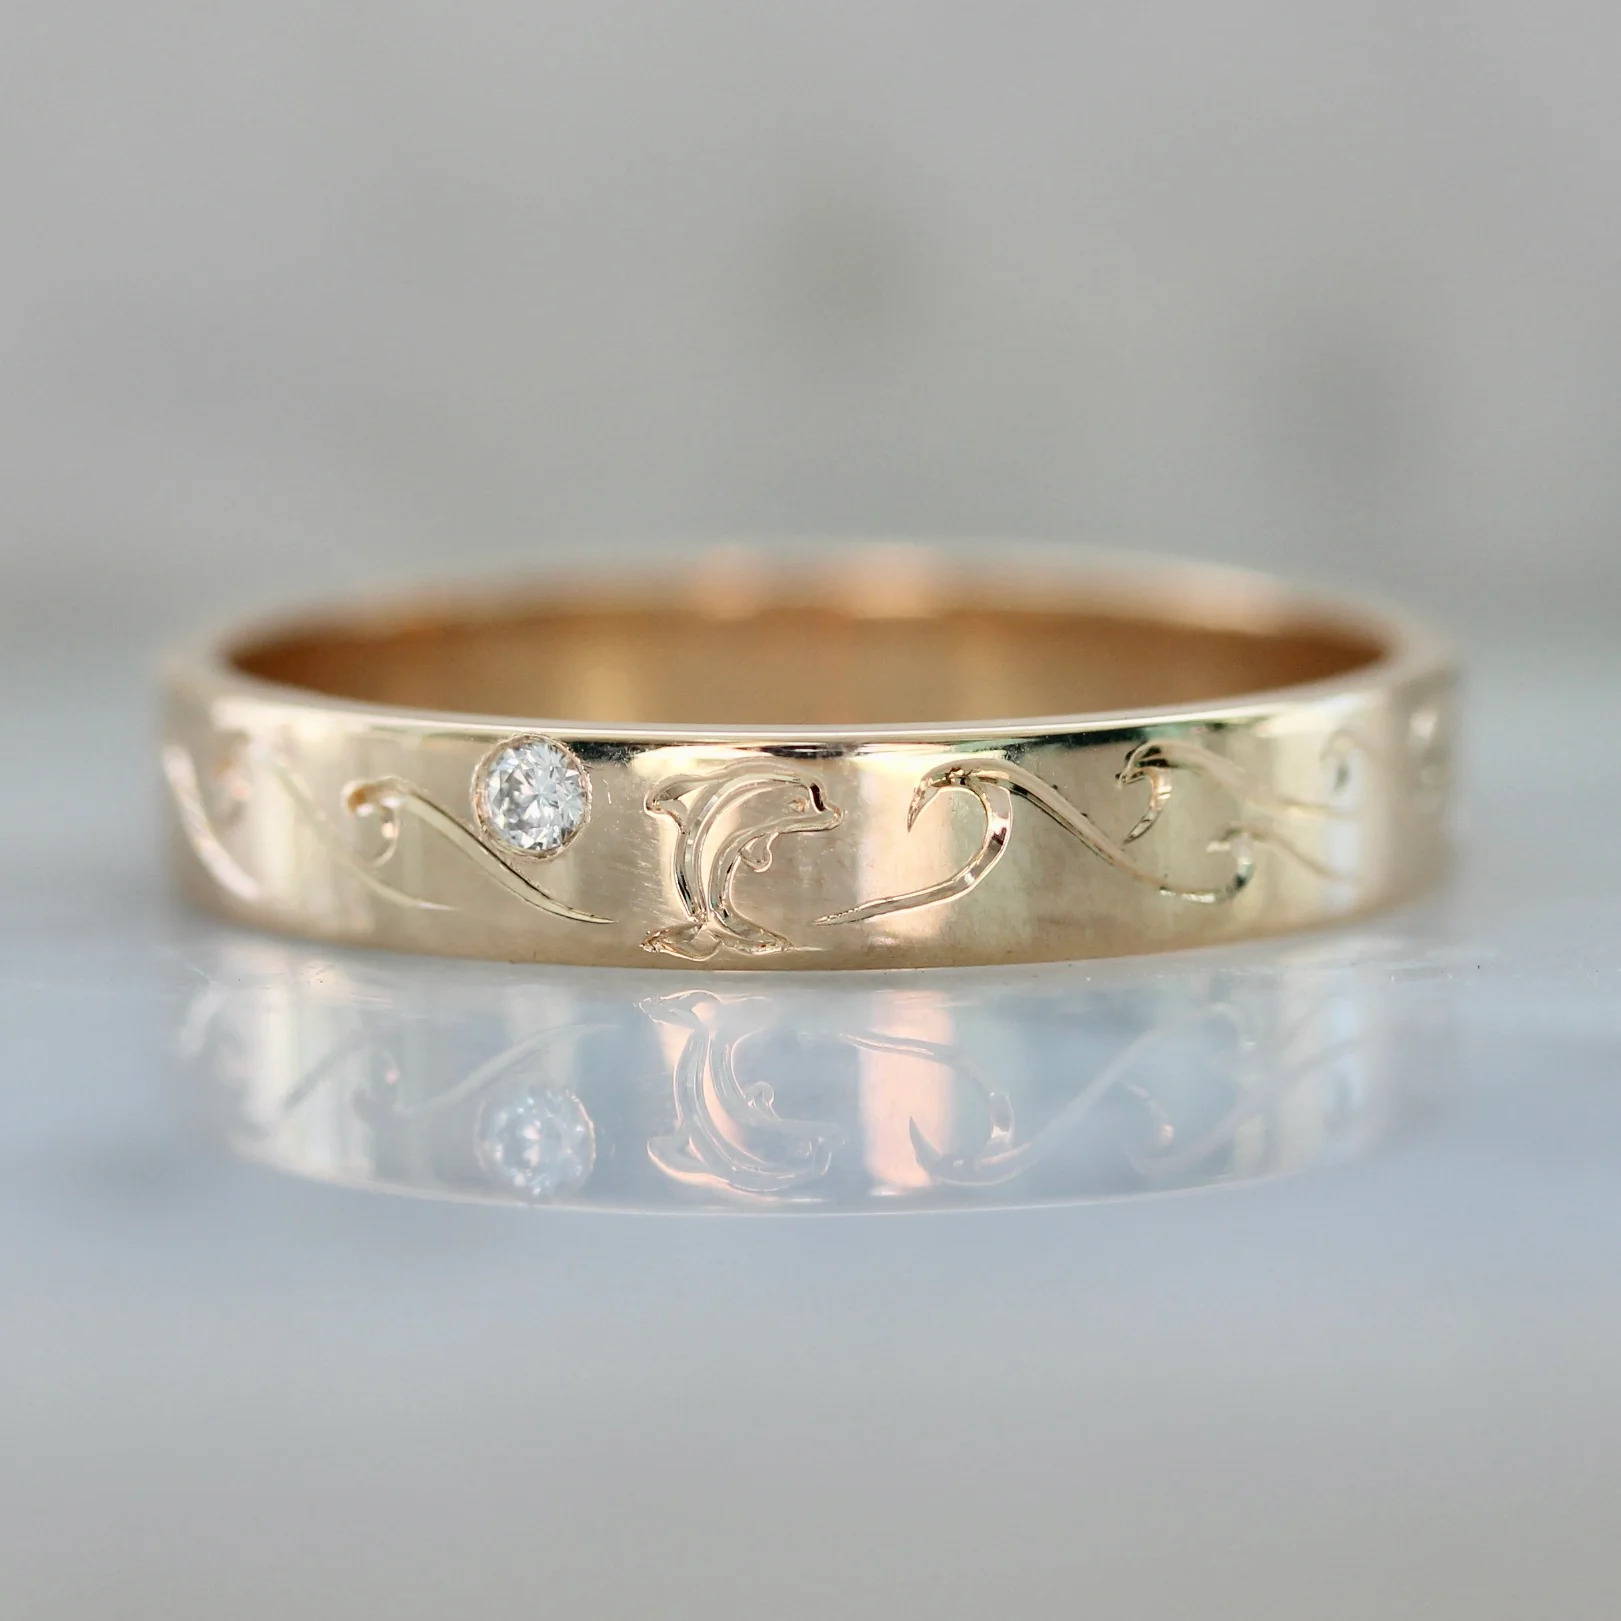 gold band with dolphin engraving and a diamond